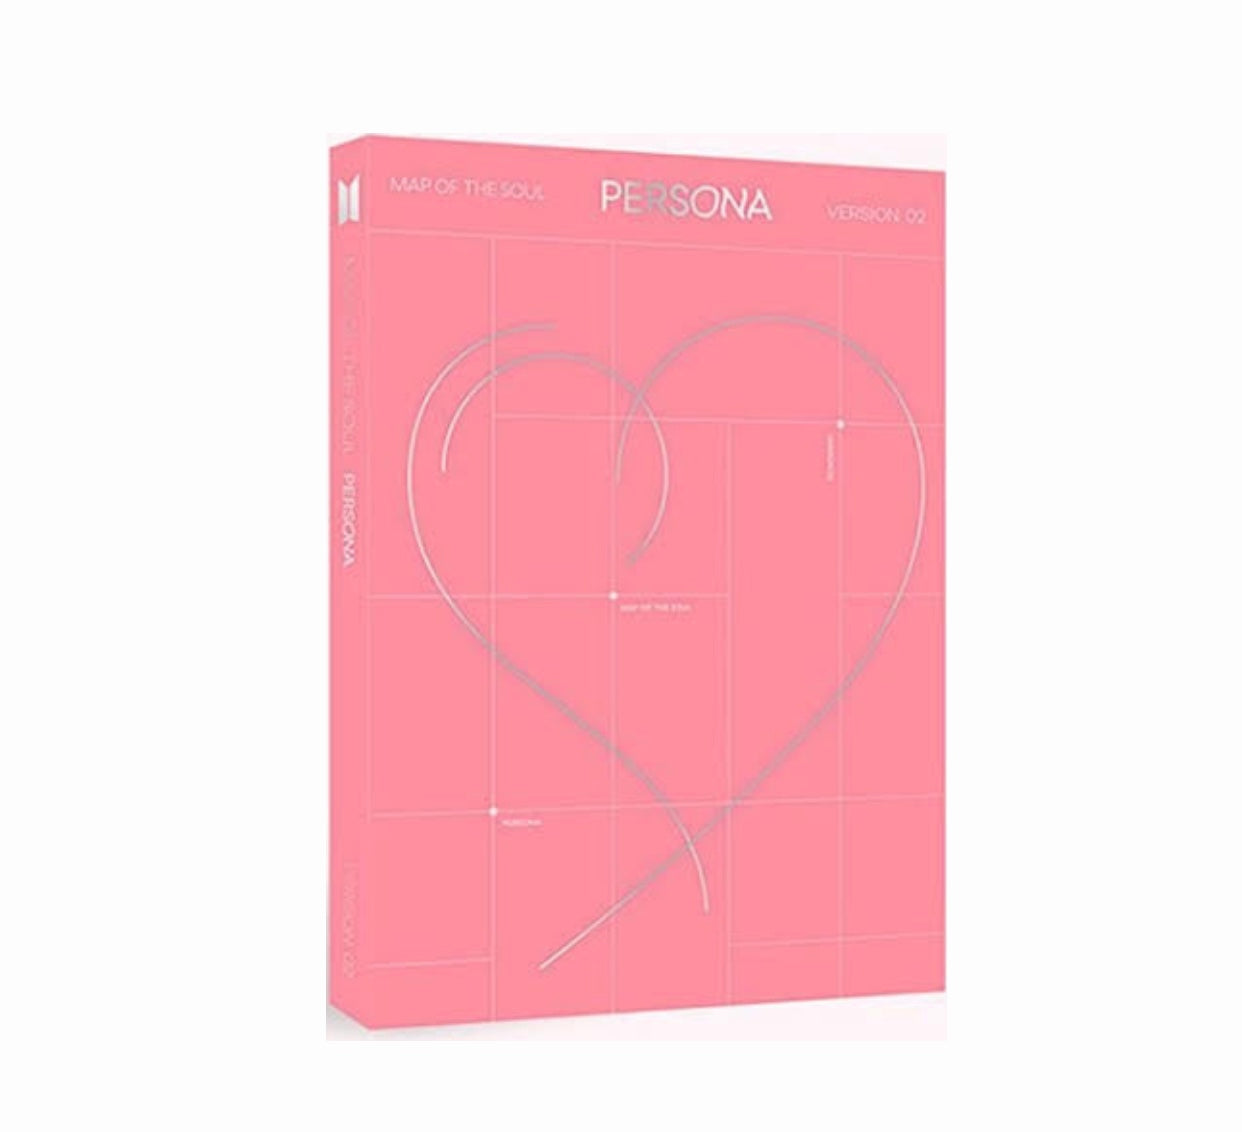 BTS - Map of the Soul: Persona version 02